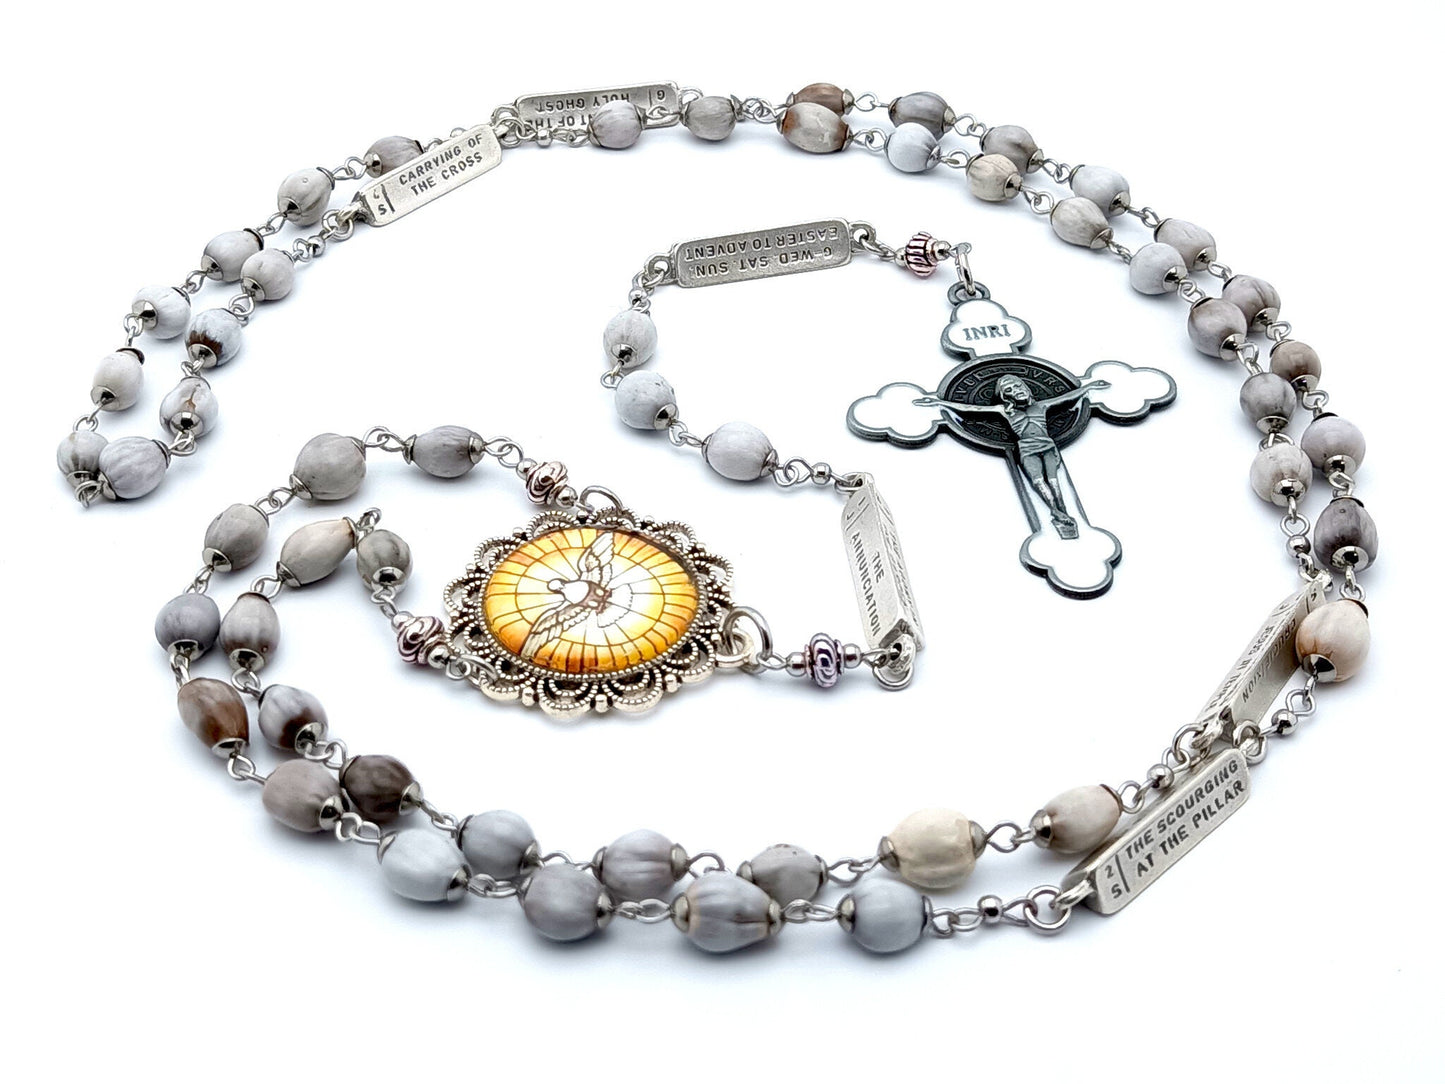 Holy Spirit unique rosary beads with jobs tears and mysteries of the rosary linking beads, white enamel crucifix and picture centre medal.